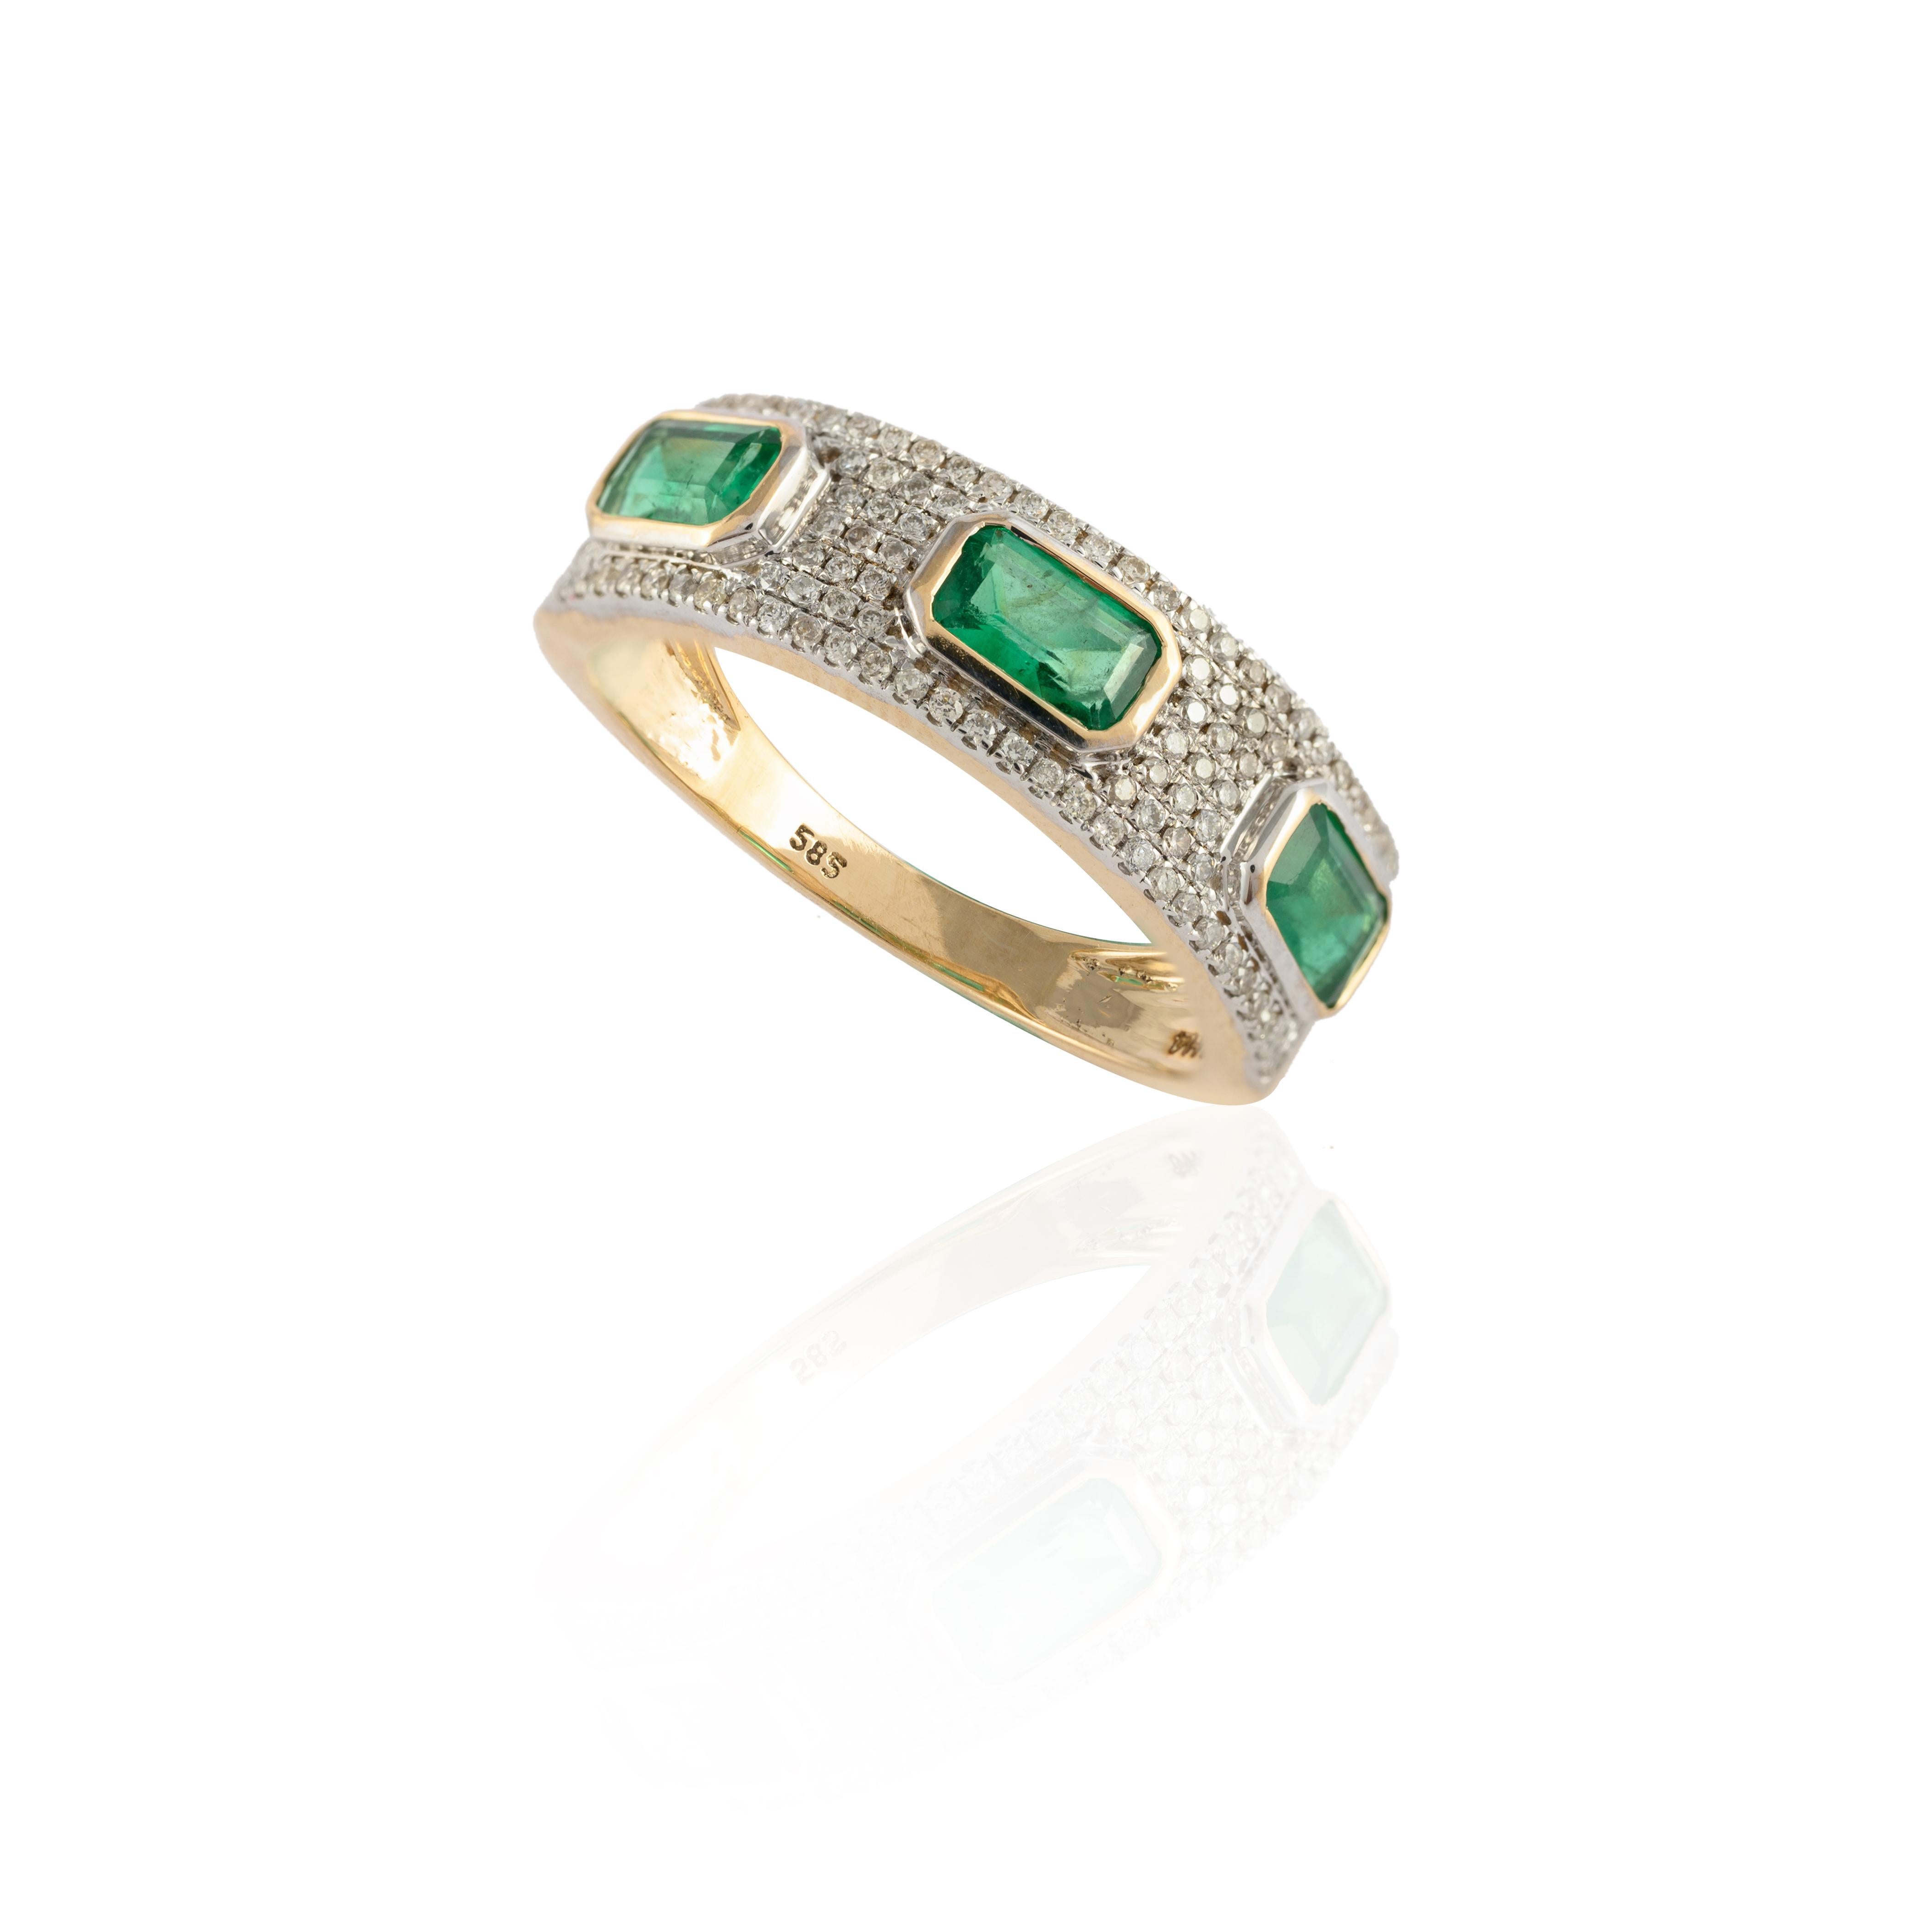 For Sale:  Impeccable Three Stone Emerald and Diamond Engagement Ring in 14k Yellow Gold 5